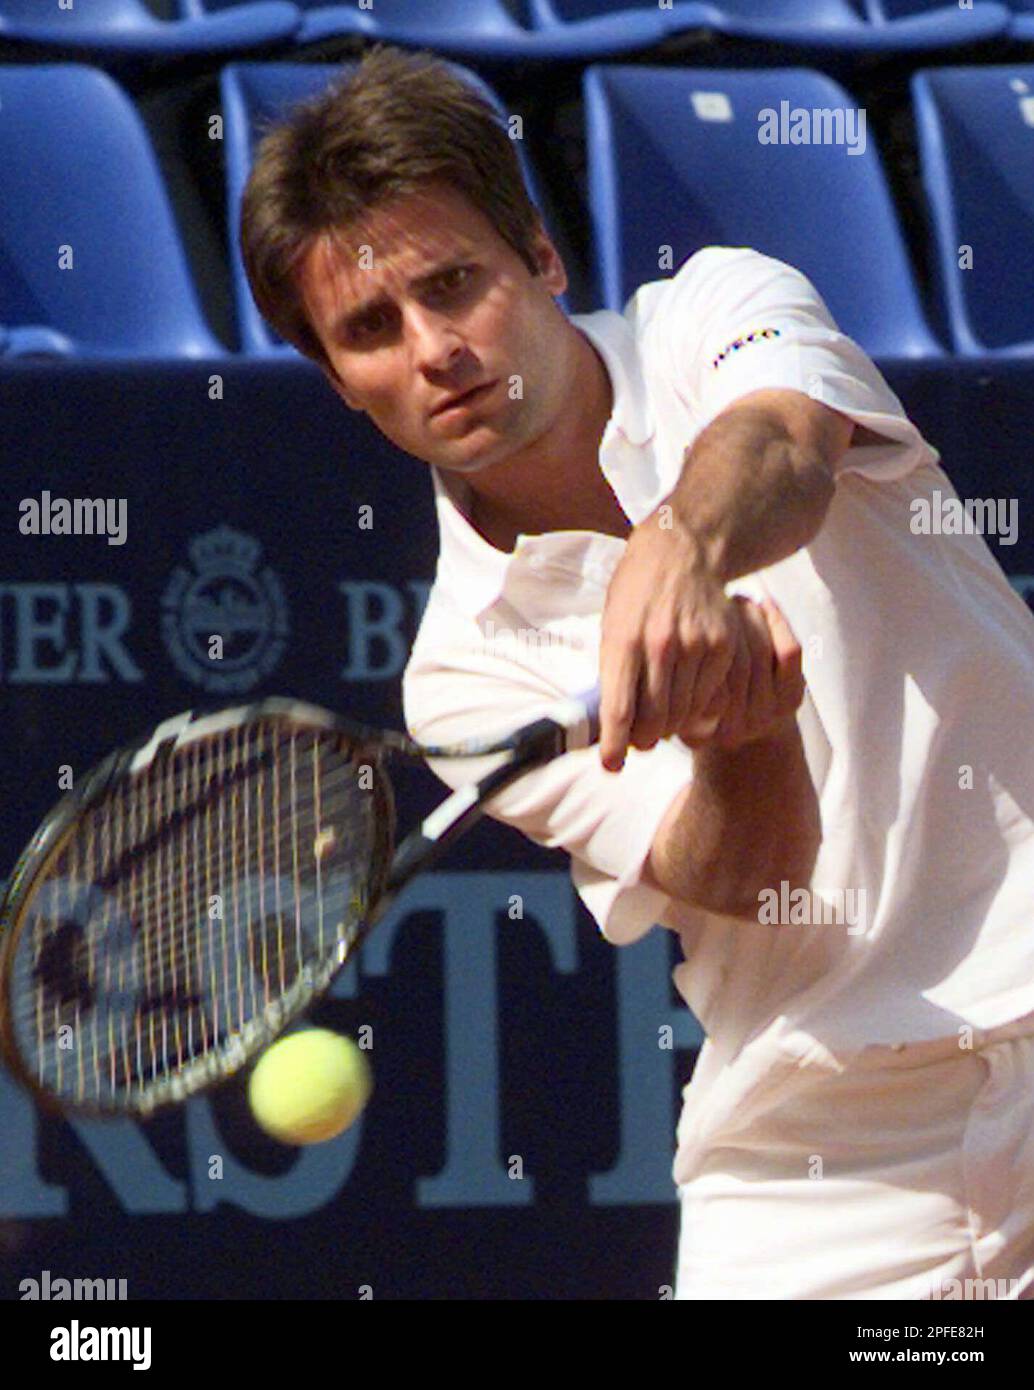 France's Fabrice Santoro returns the ball to Italy's Renzo Furlan, Monday,  May 12, 1997, during the first day of the Italian Open men's clay court  tennis tournament in Rome. (AP Photo/Plinio lepri